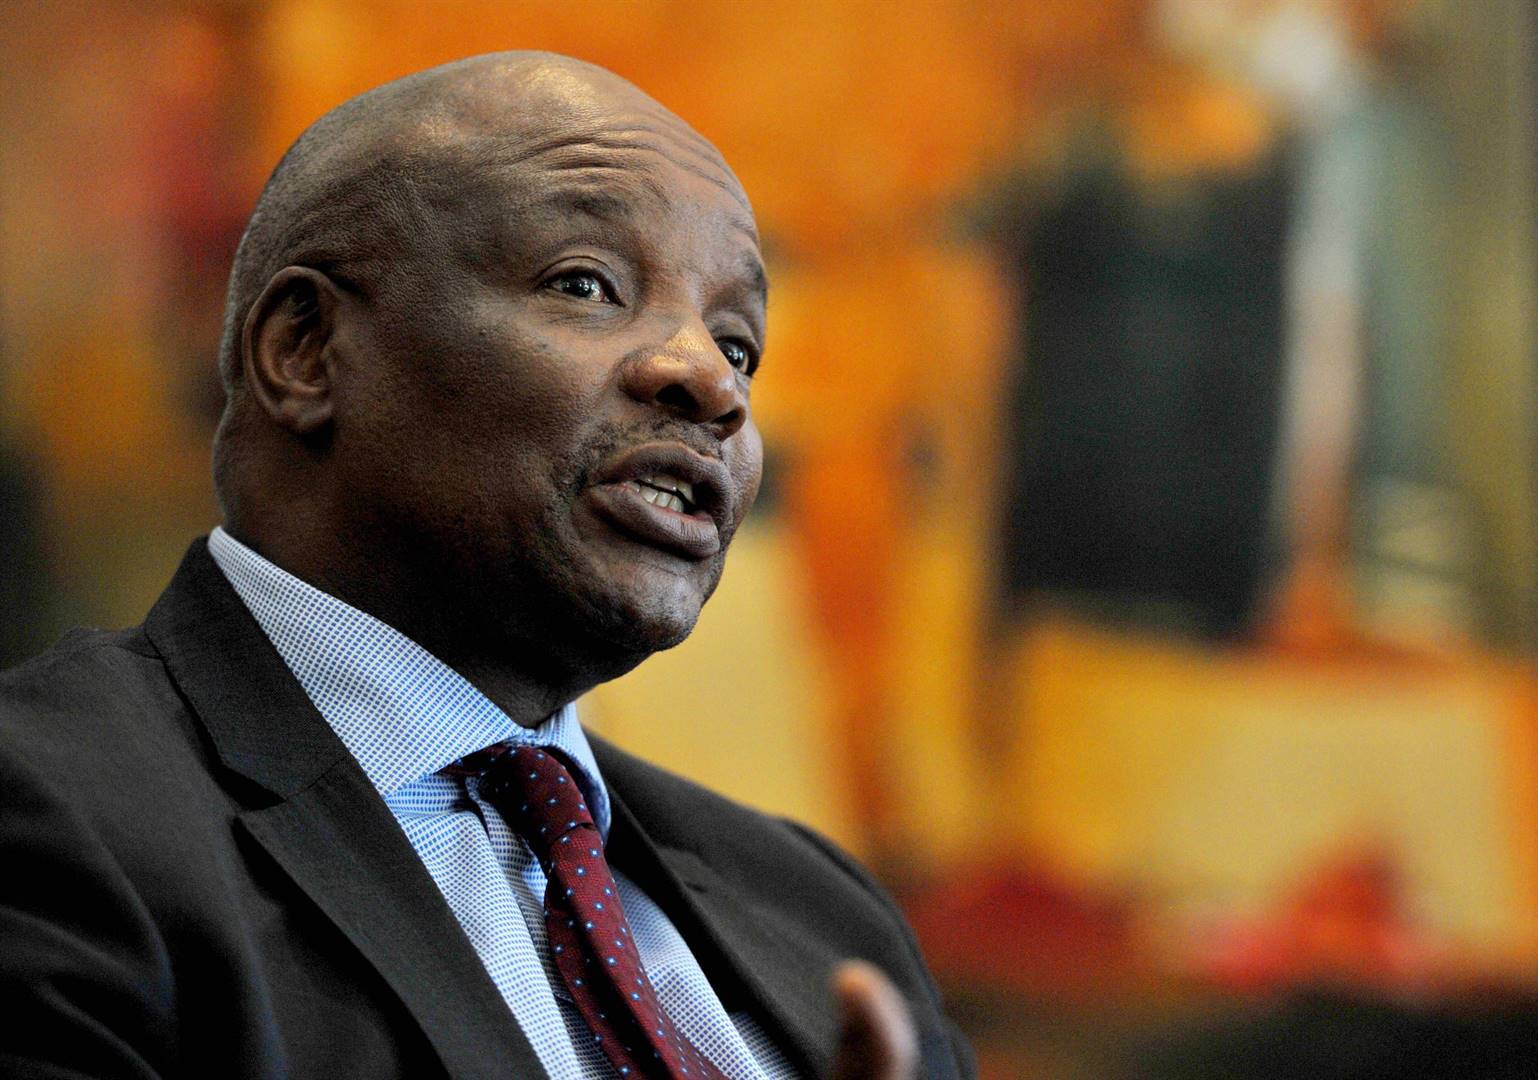 The decision to fire him from this role was made two weeks after an extremely unhappy Pityana sued the Prudential Authority, Photo: City Press